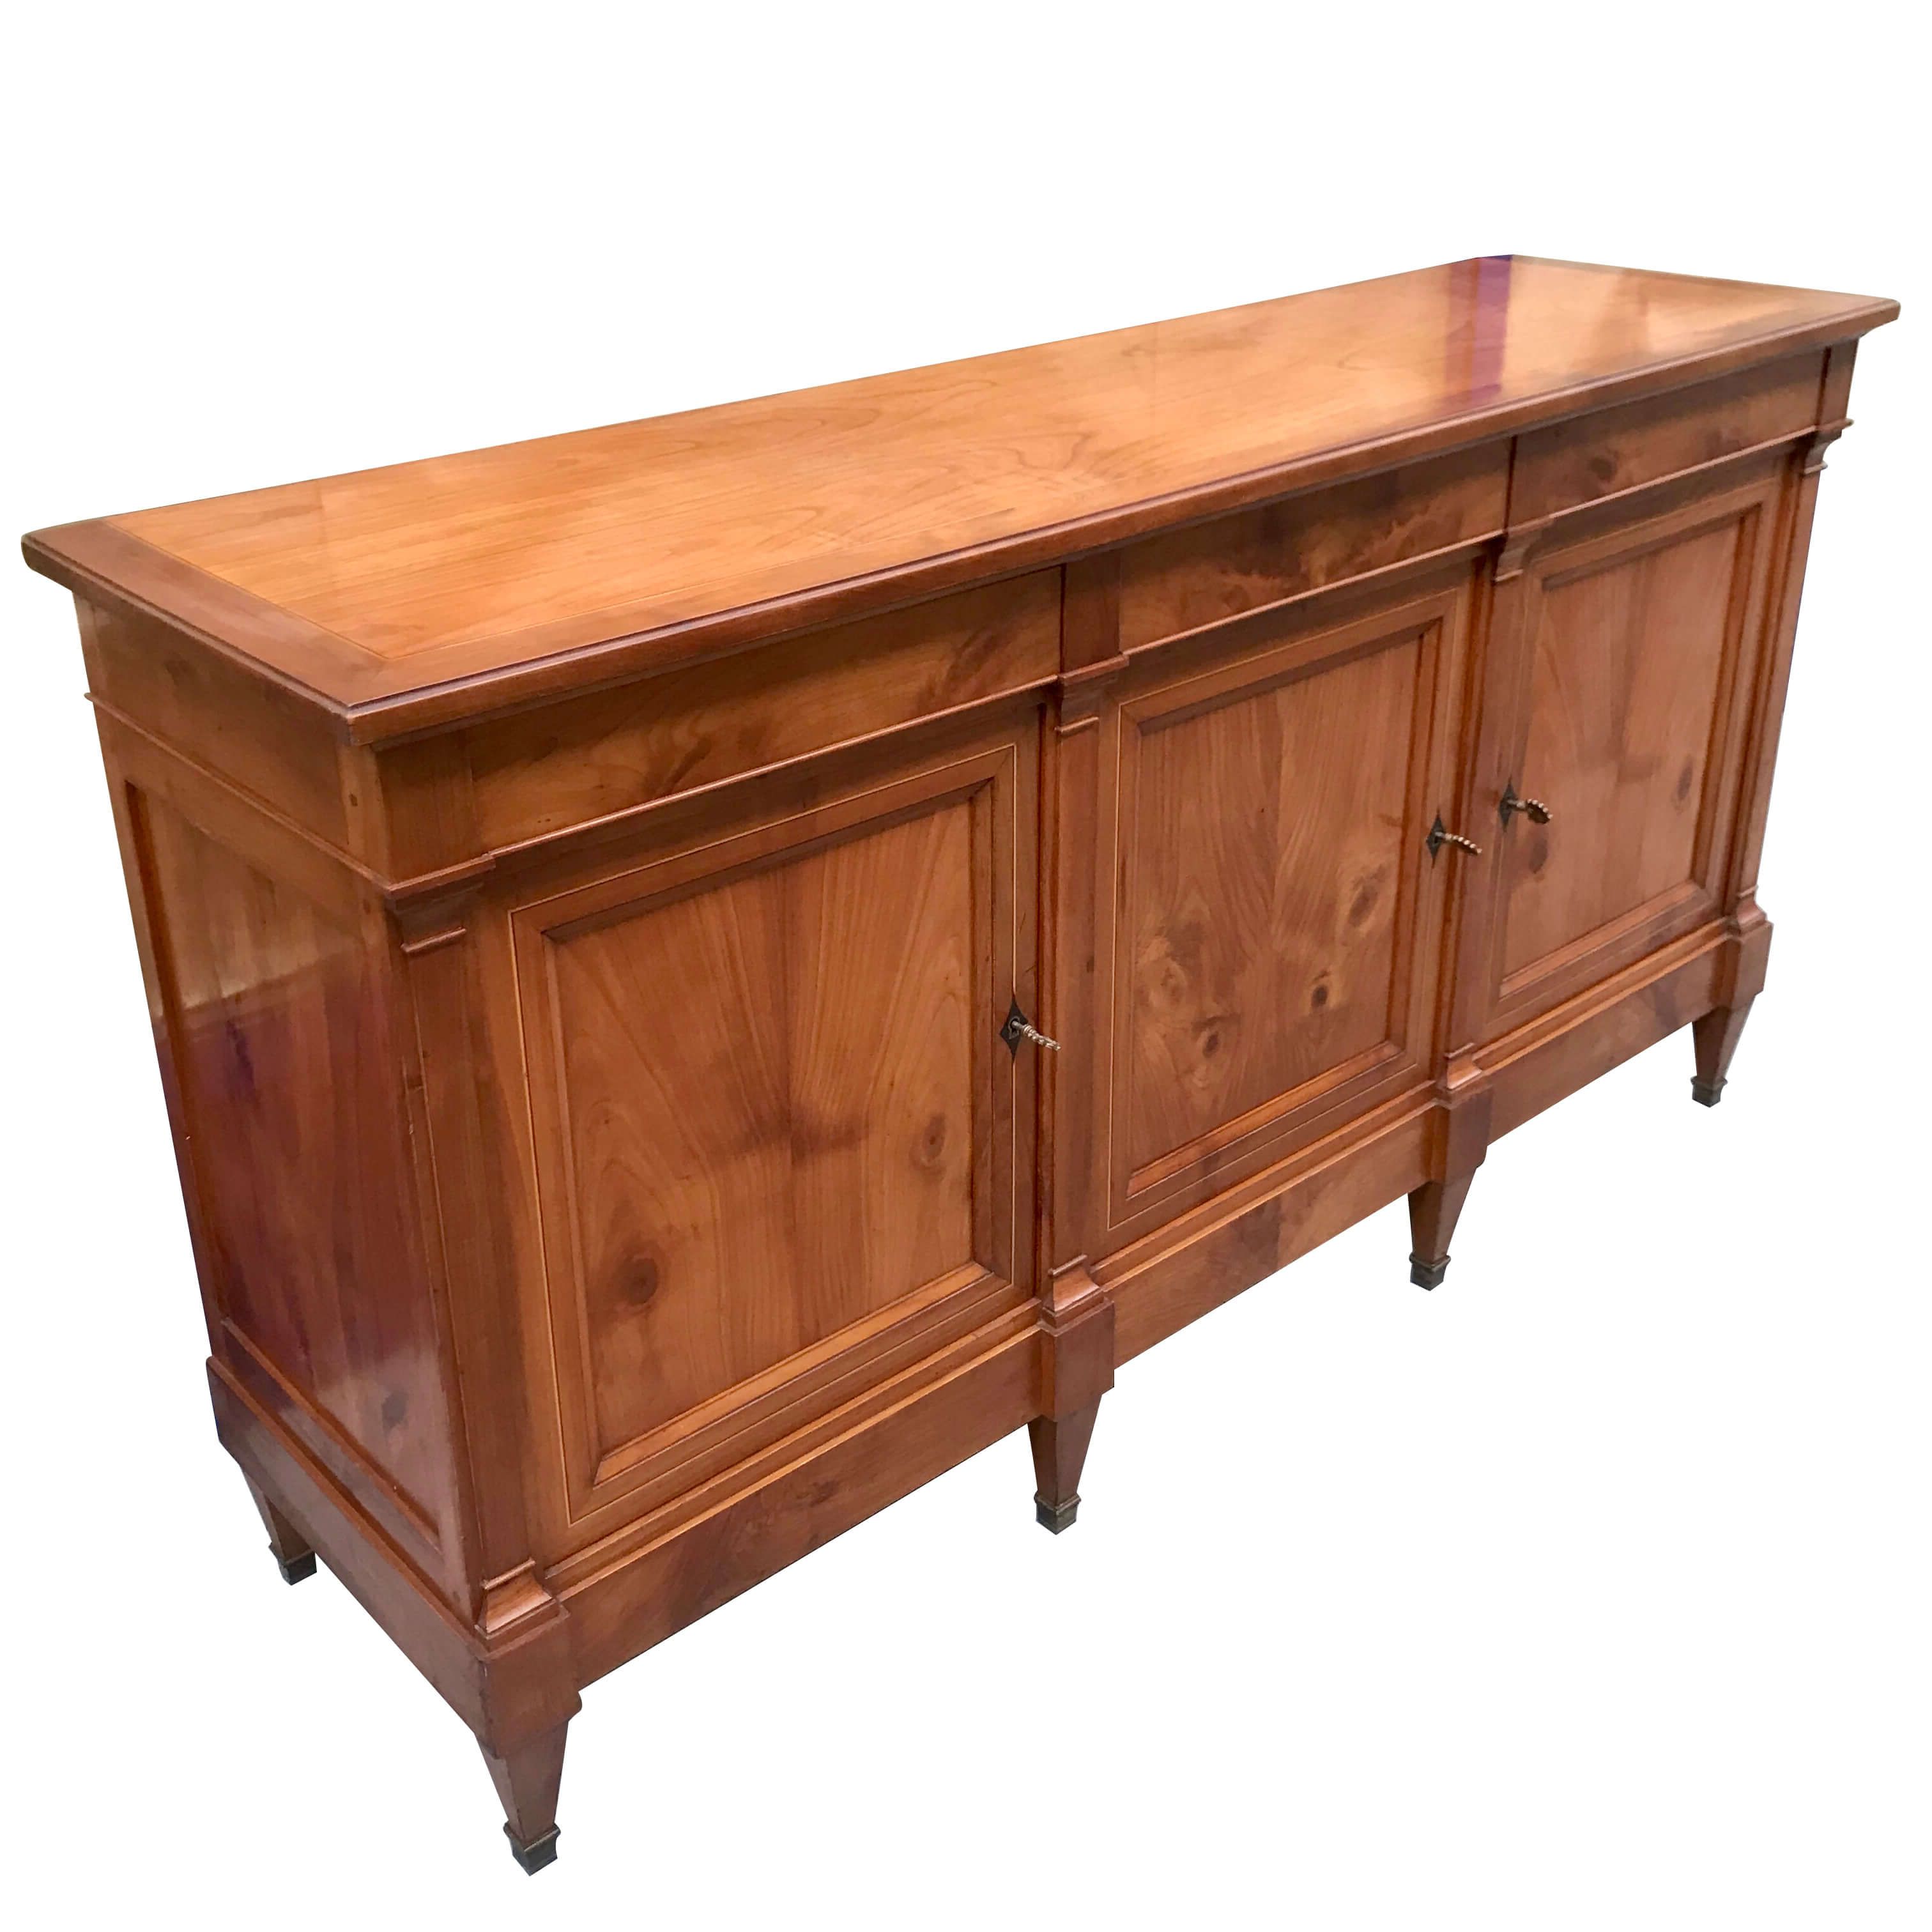 Directoire Style Sideboard With 3 Doors And 3 Drawers In Cherry Wood With  Inlaid Fillets And Bronze Brackets, 19th Century | Intondo For 3 Doors Sideboards Storage Cabinet (View 9 of 20)